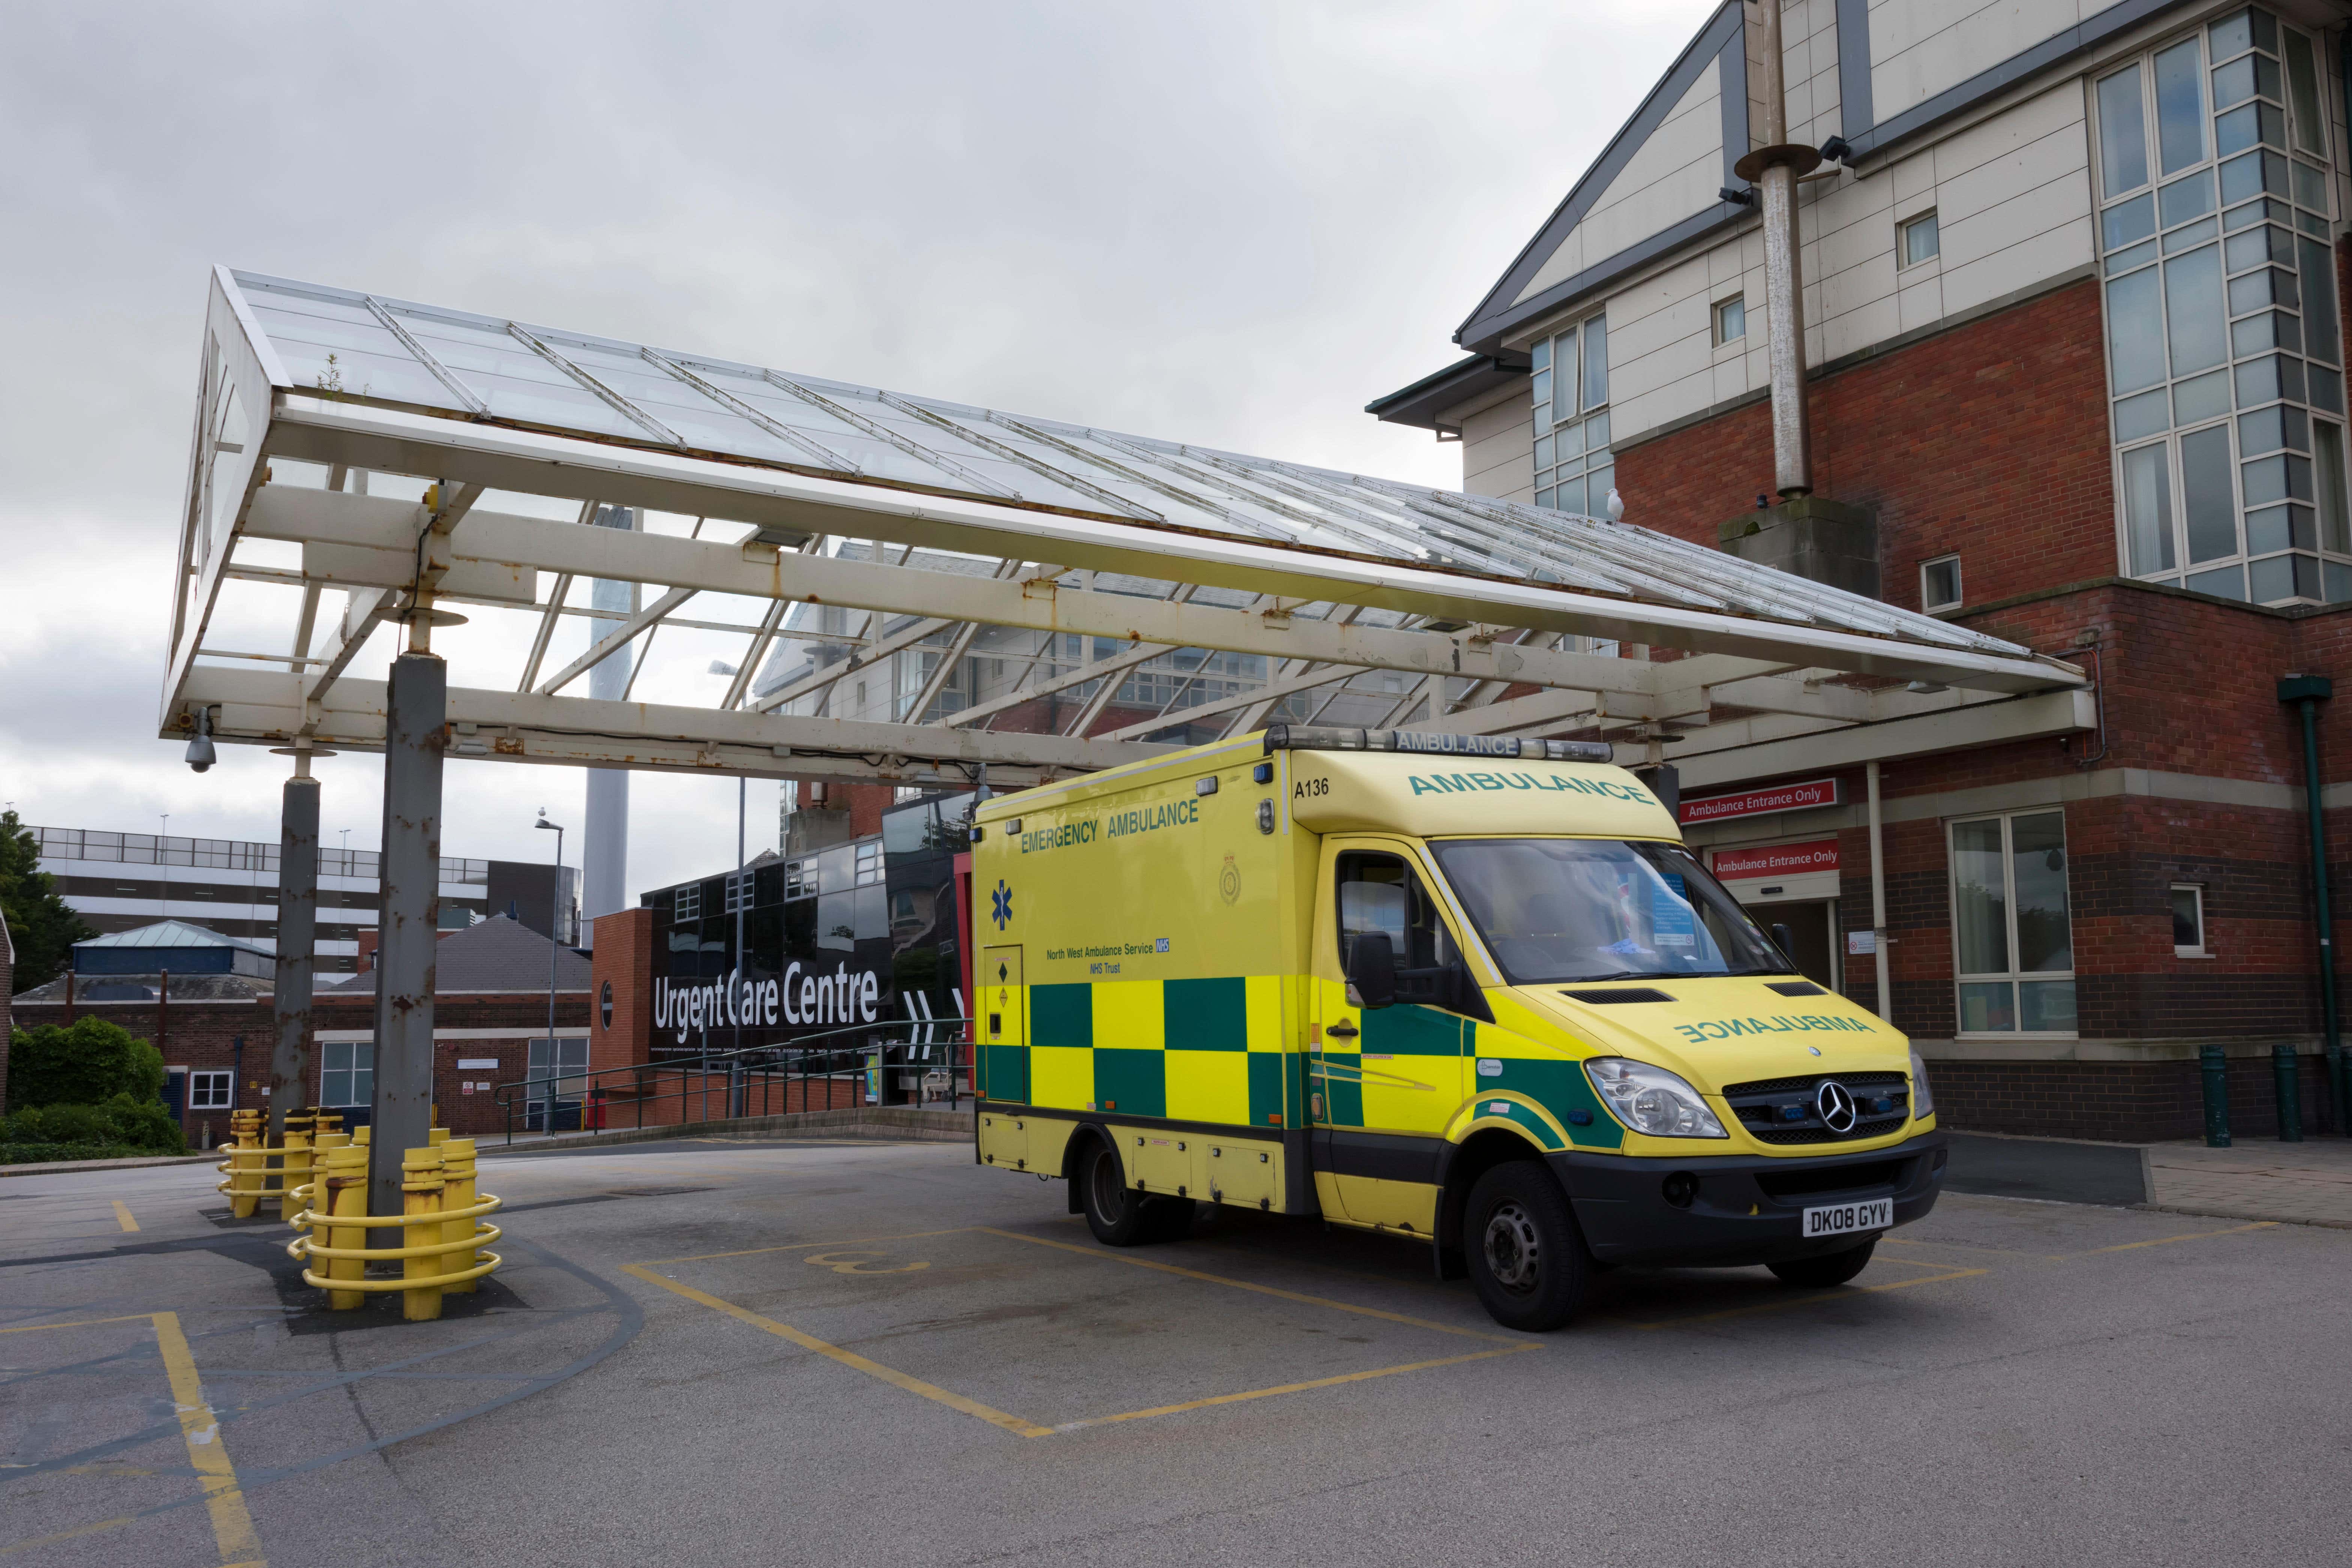 The cause of the flooding at Blackpool Victoria Hospital is not known